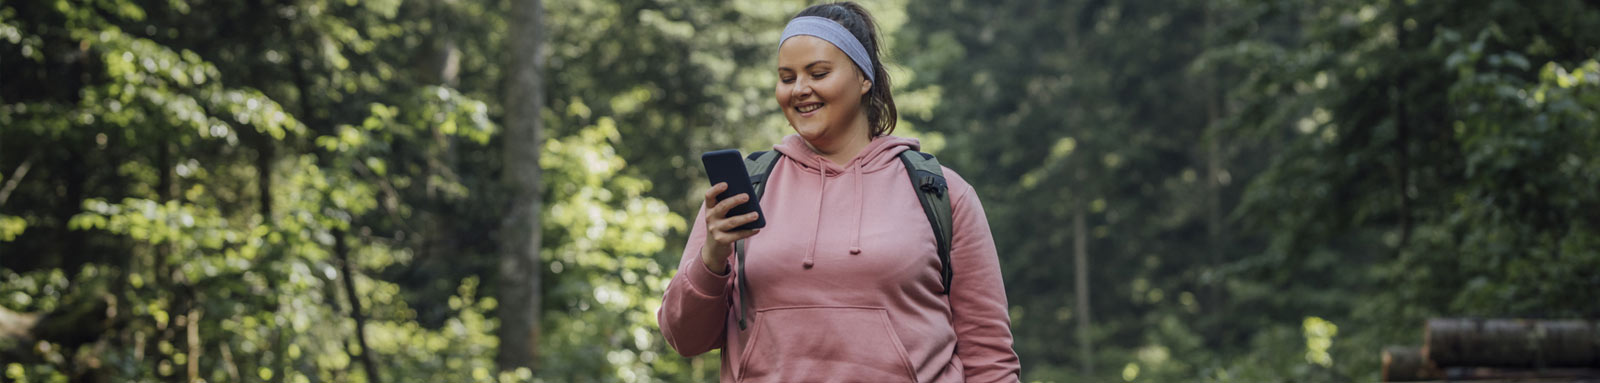 woman walking outdoors with phone